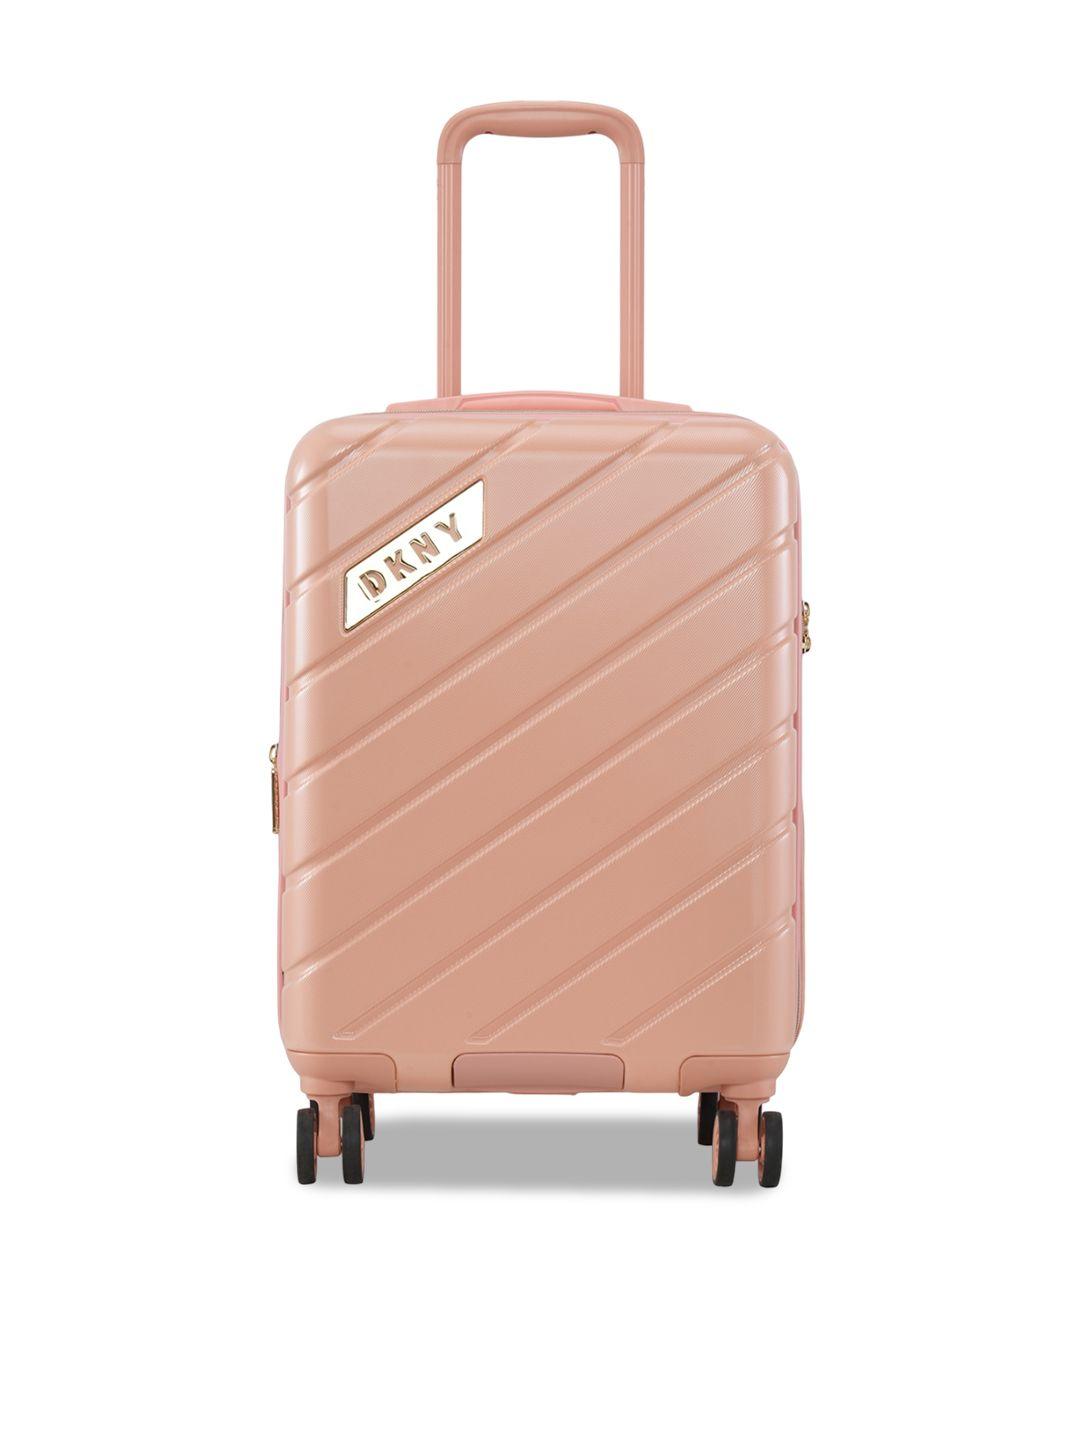 dkny bias textured hard-sided cabin abs trolley suitcase